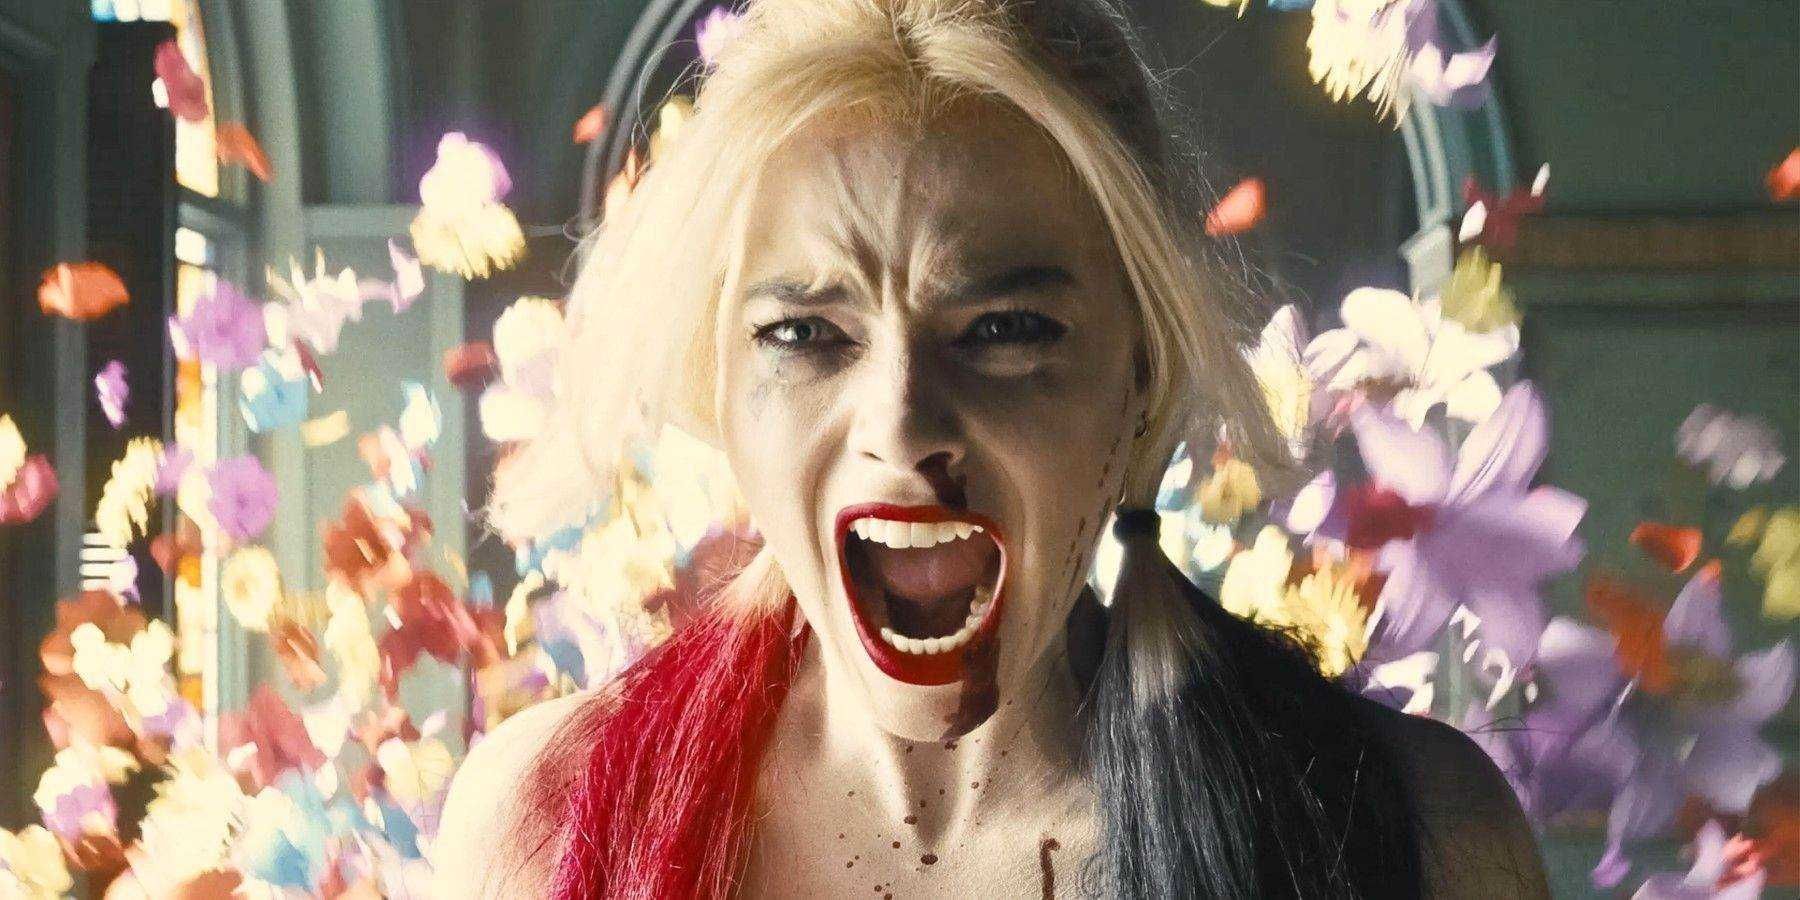 Margot Robbie Addresses Potential Return As Harley Quinn And Lady Gagas Portrayal In Joker 2